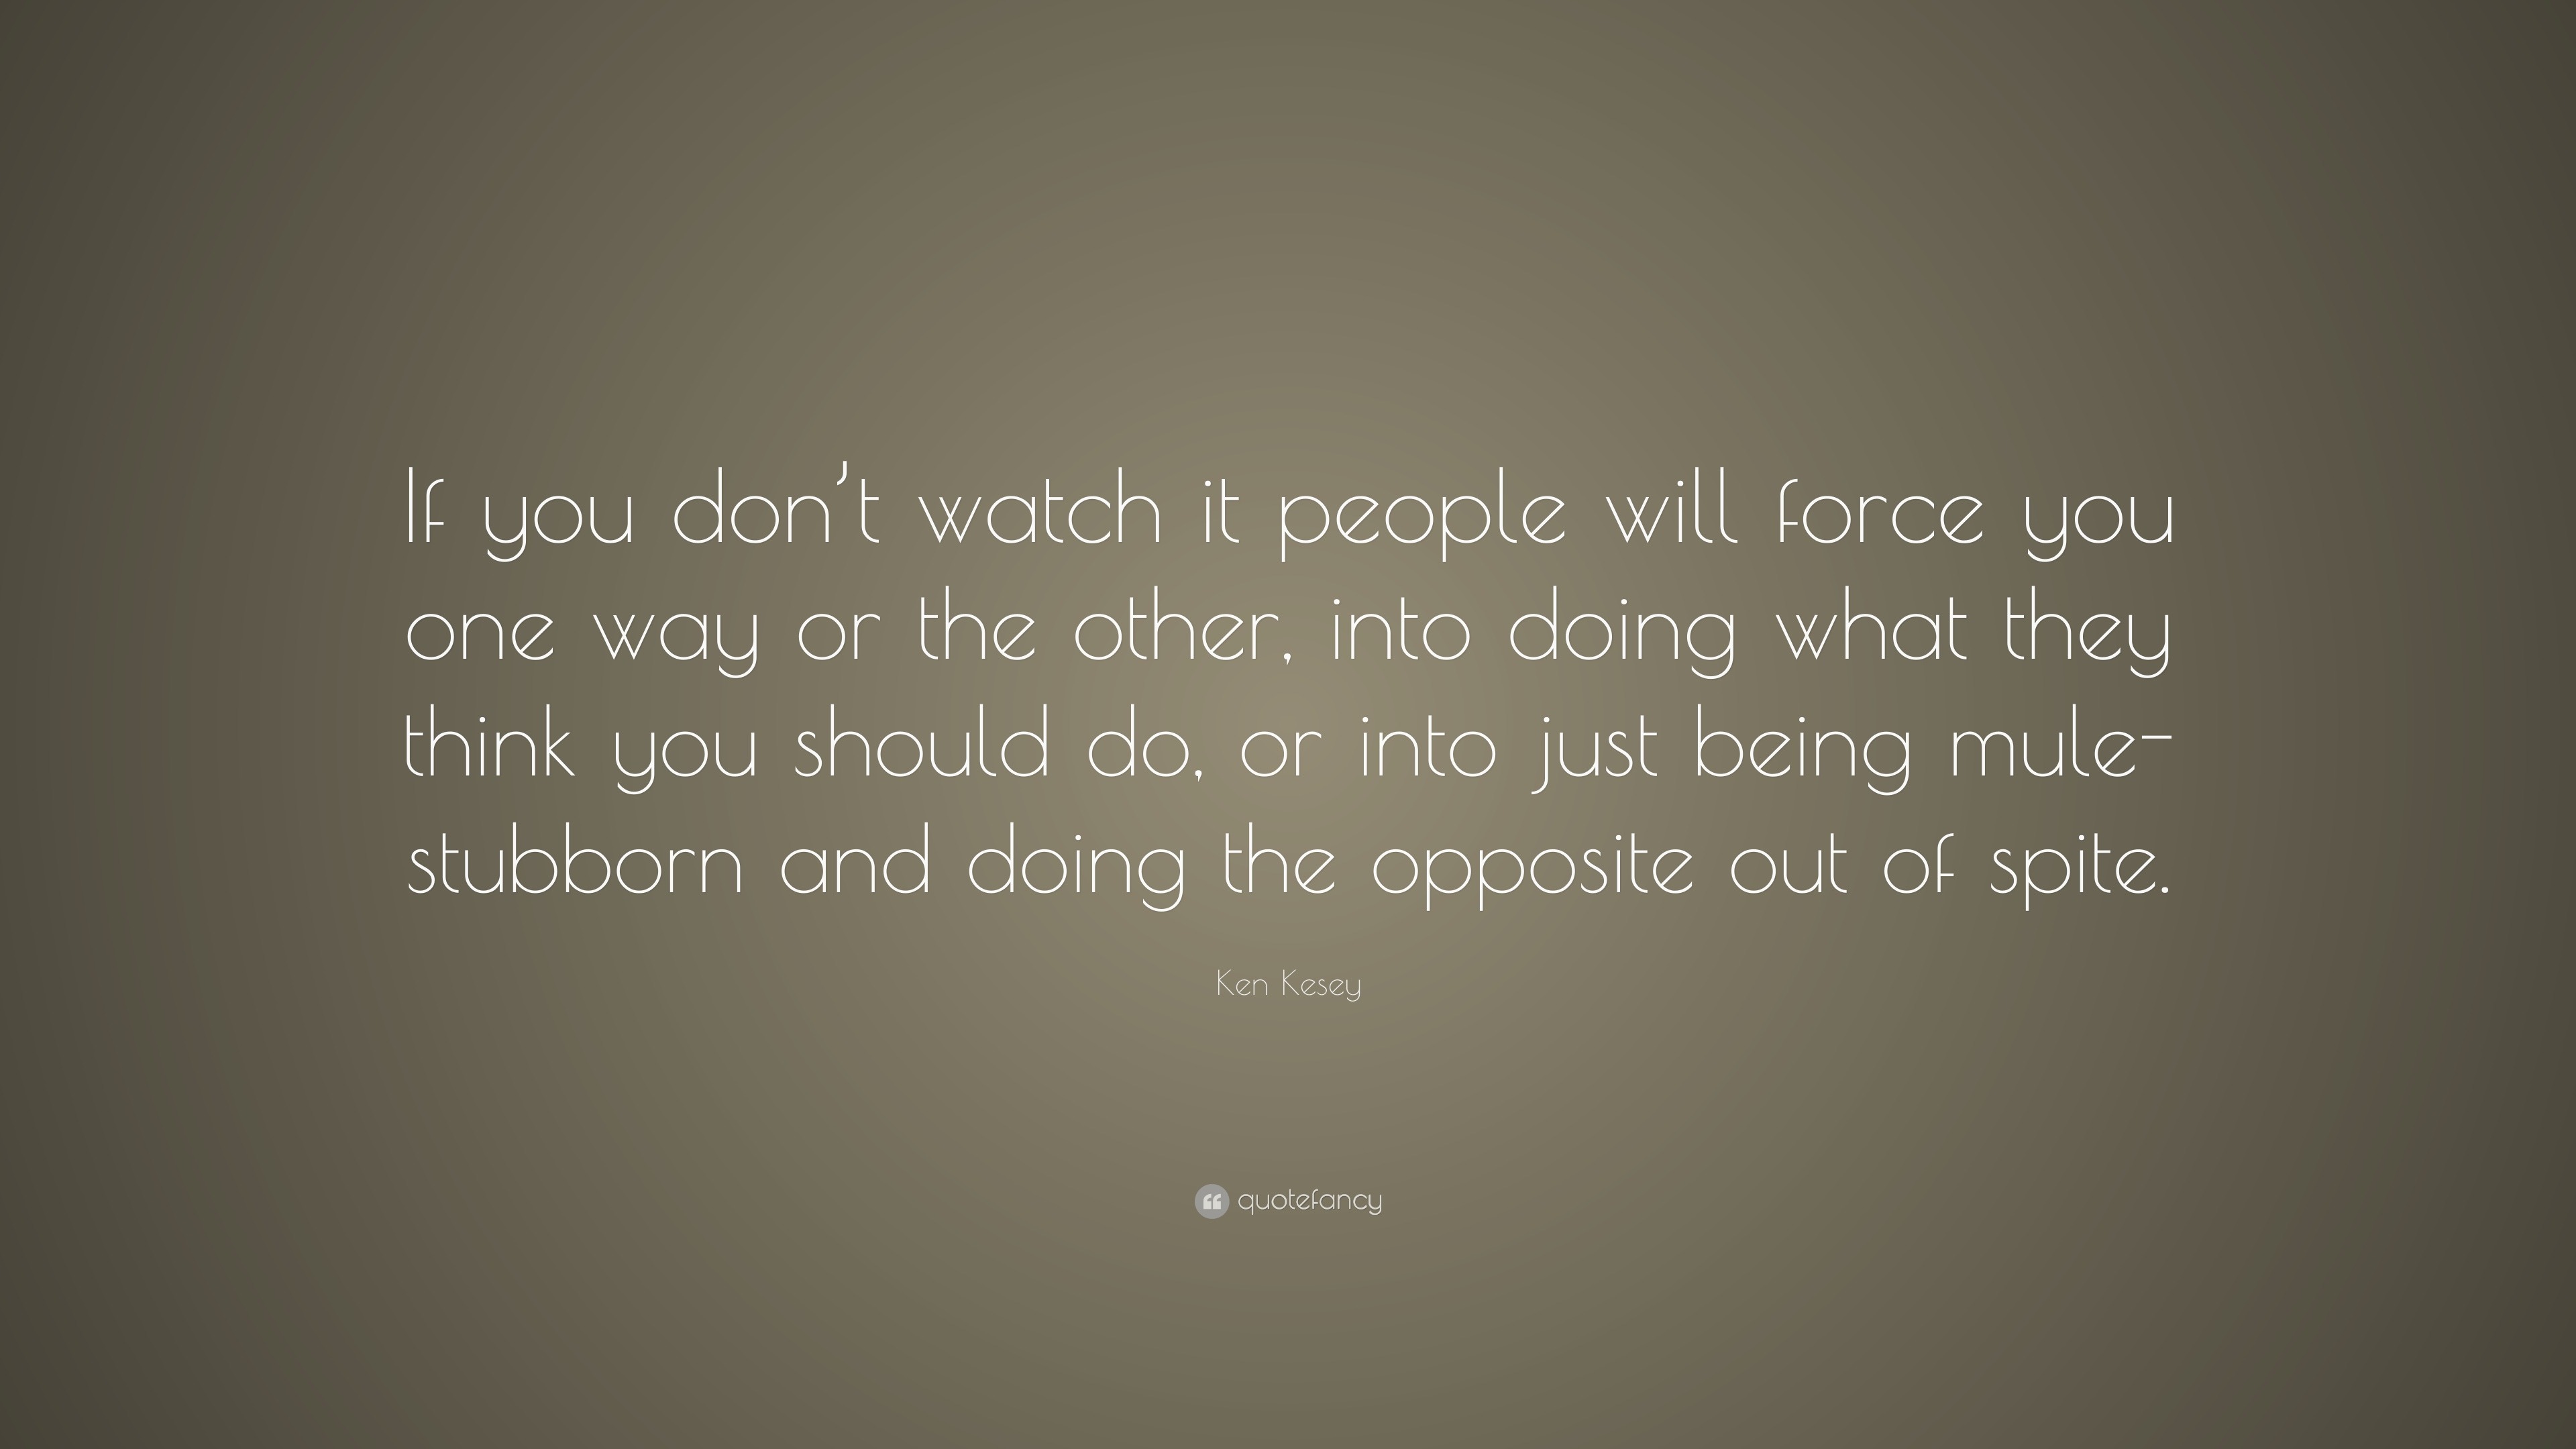 Ken Kesey Quote: “If you don’t watch it people will force you one way ...